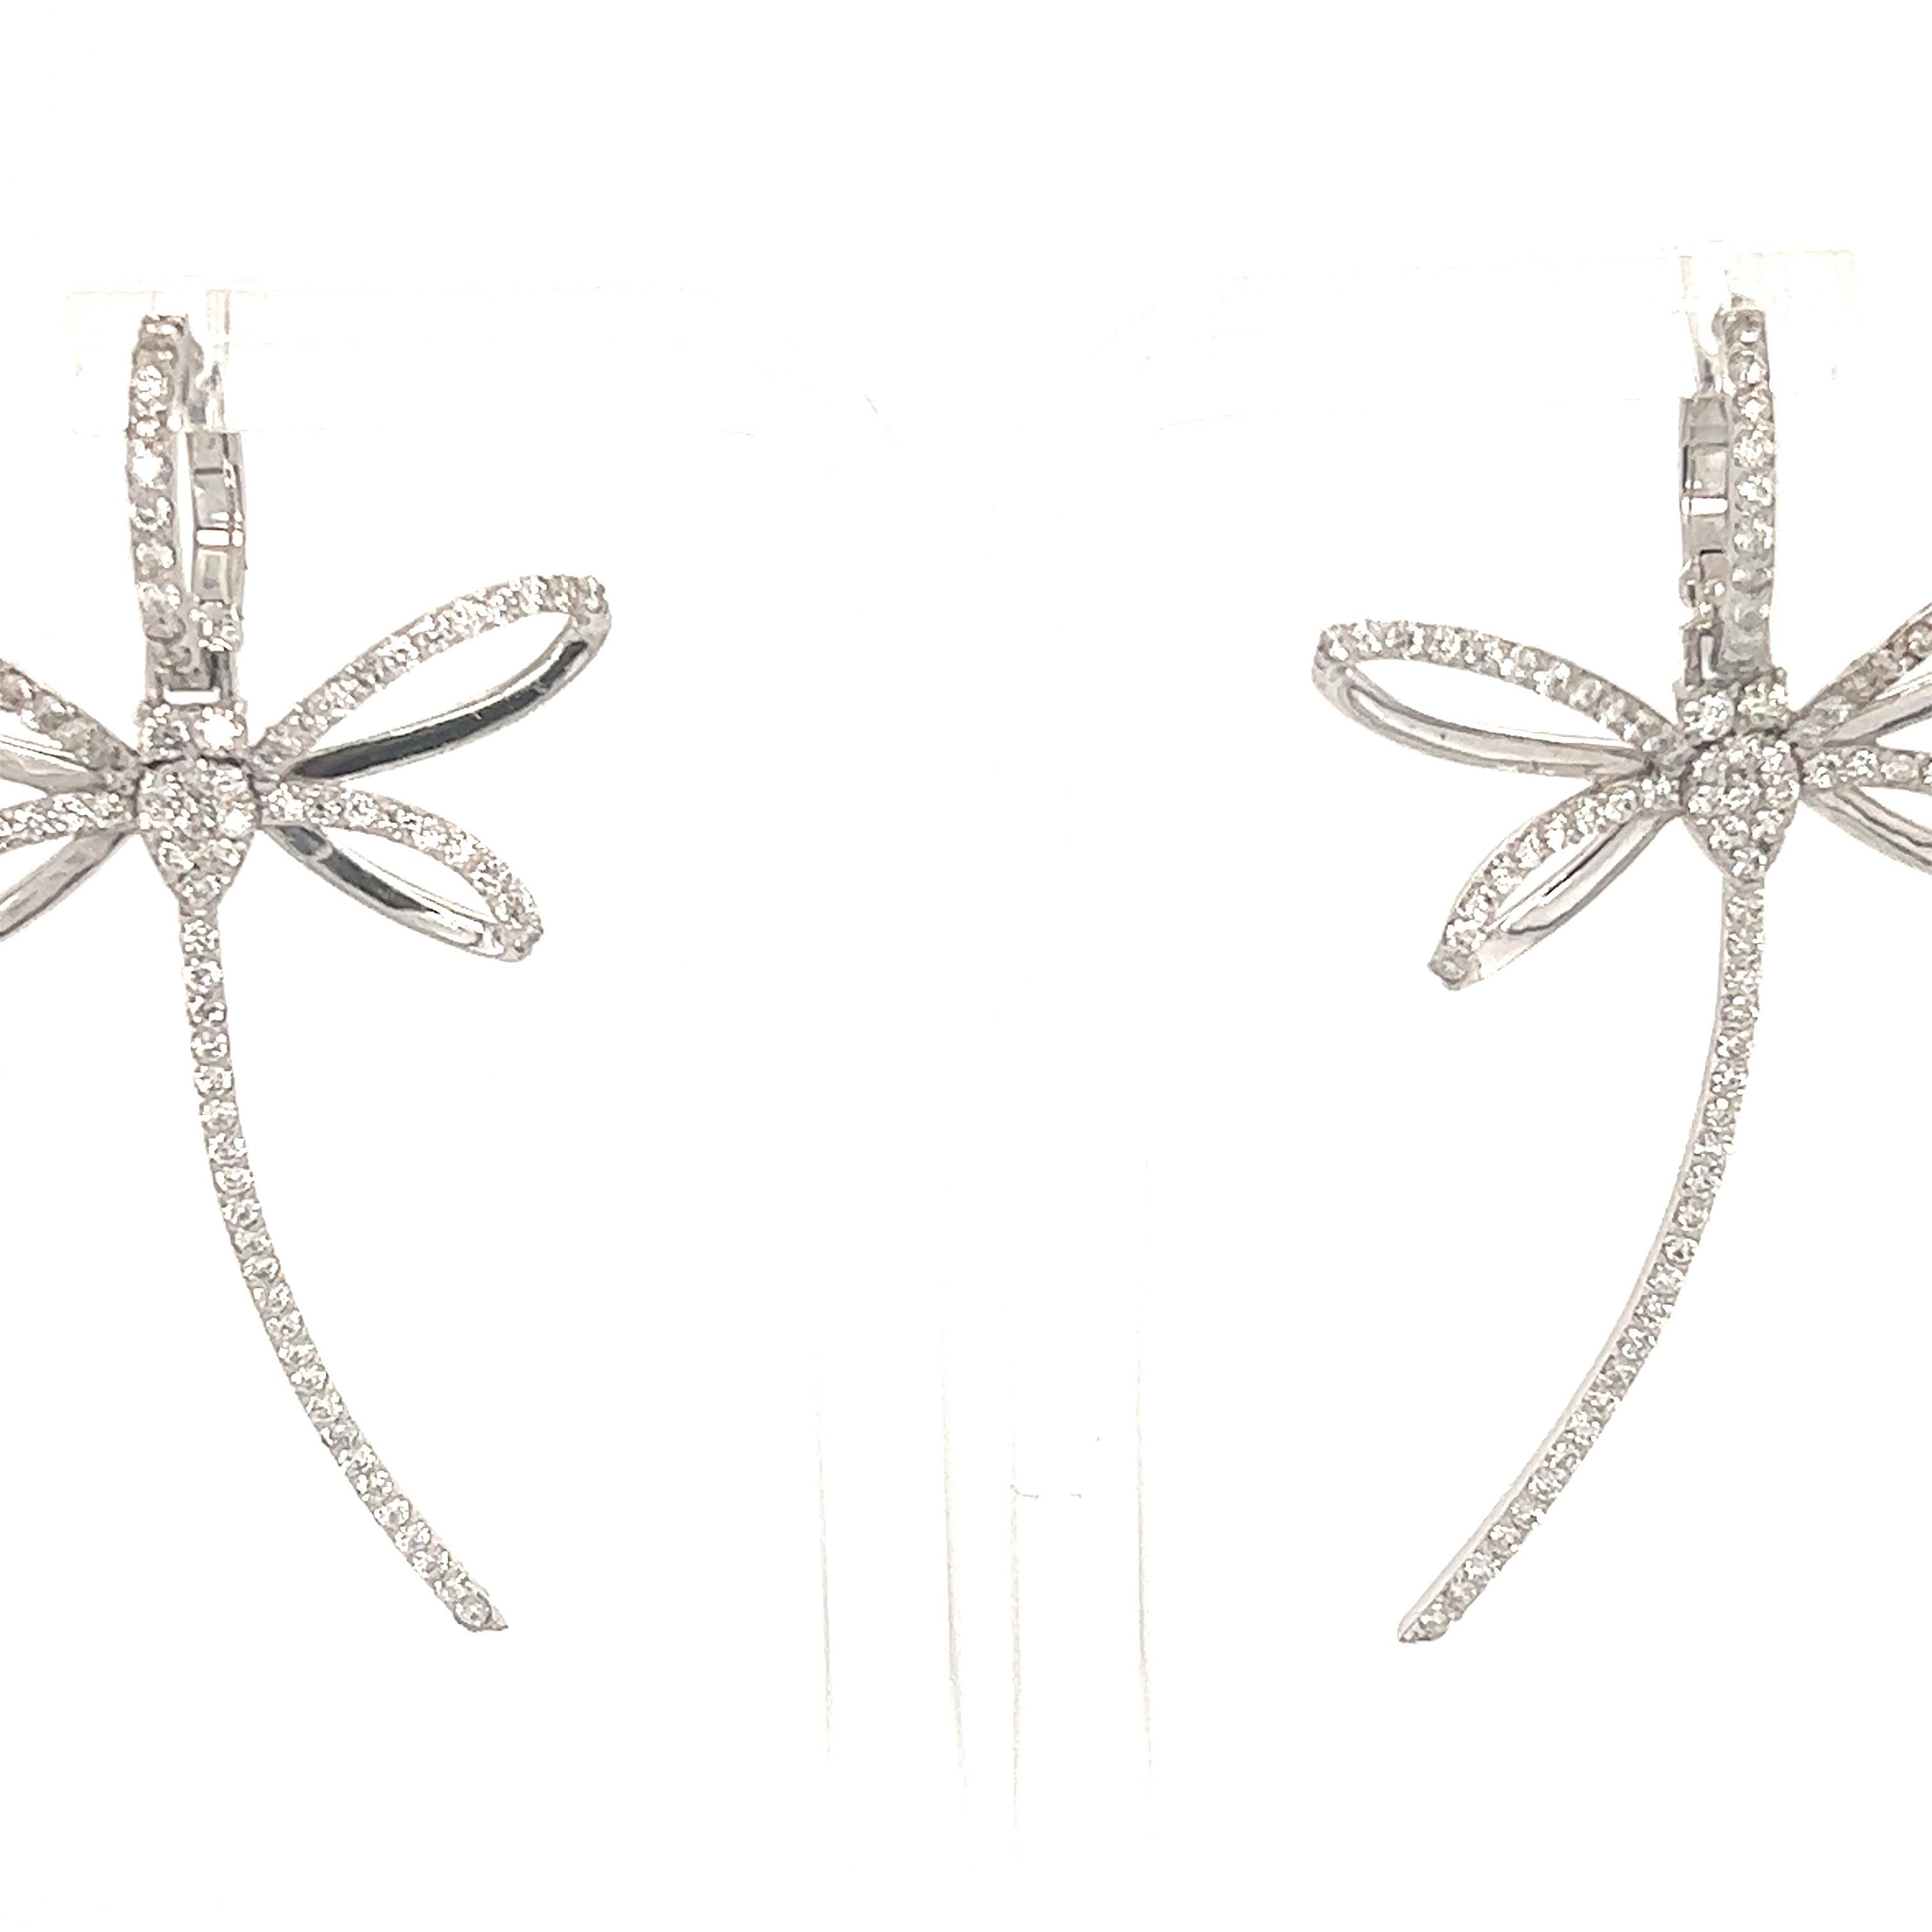 These earrings have Natural Round Cut White Diamonds that weigh 1.47 carats. The clarity and color of the earrings are VS-F. 

They are 2 inches long and are curated in 14 Karat White Gold with an approximate weight of 6.3 grams. 

